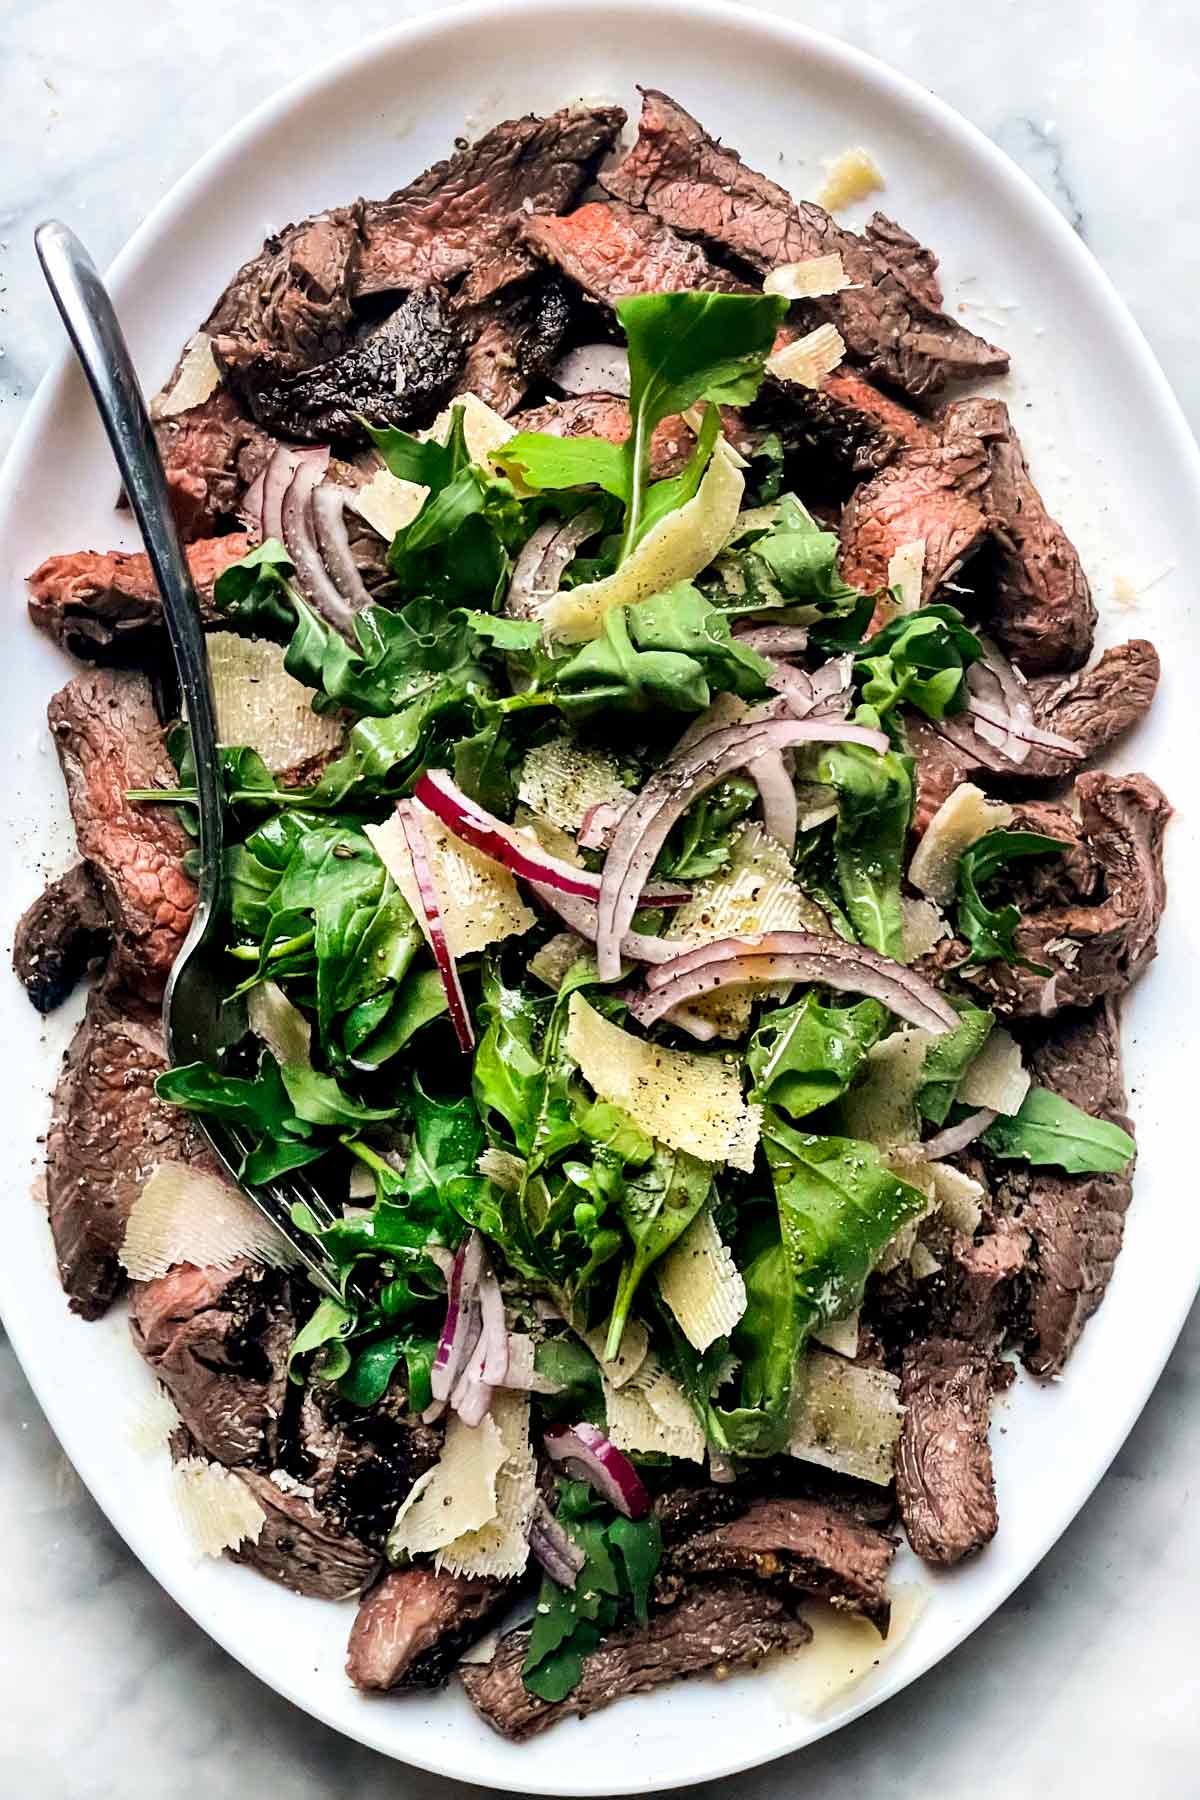 https://www.foodiecrush.com/wp-content/uploads/2023/07/Grilled-Flank-Steak-with-Arugula-and-Parmesan-foodiecrush.com-20.jpg